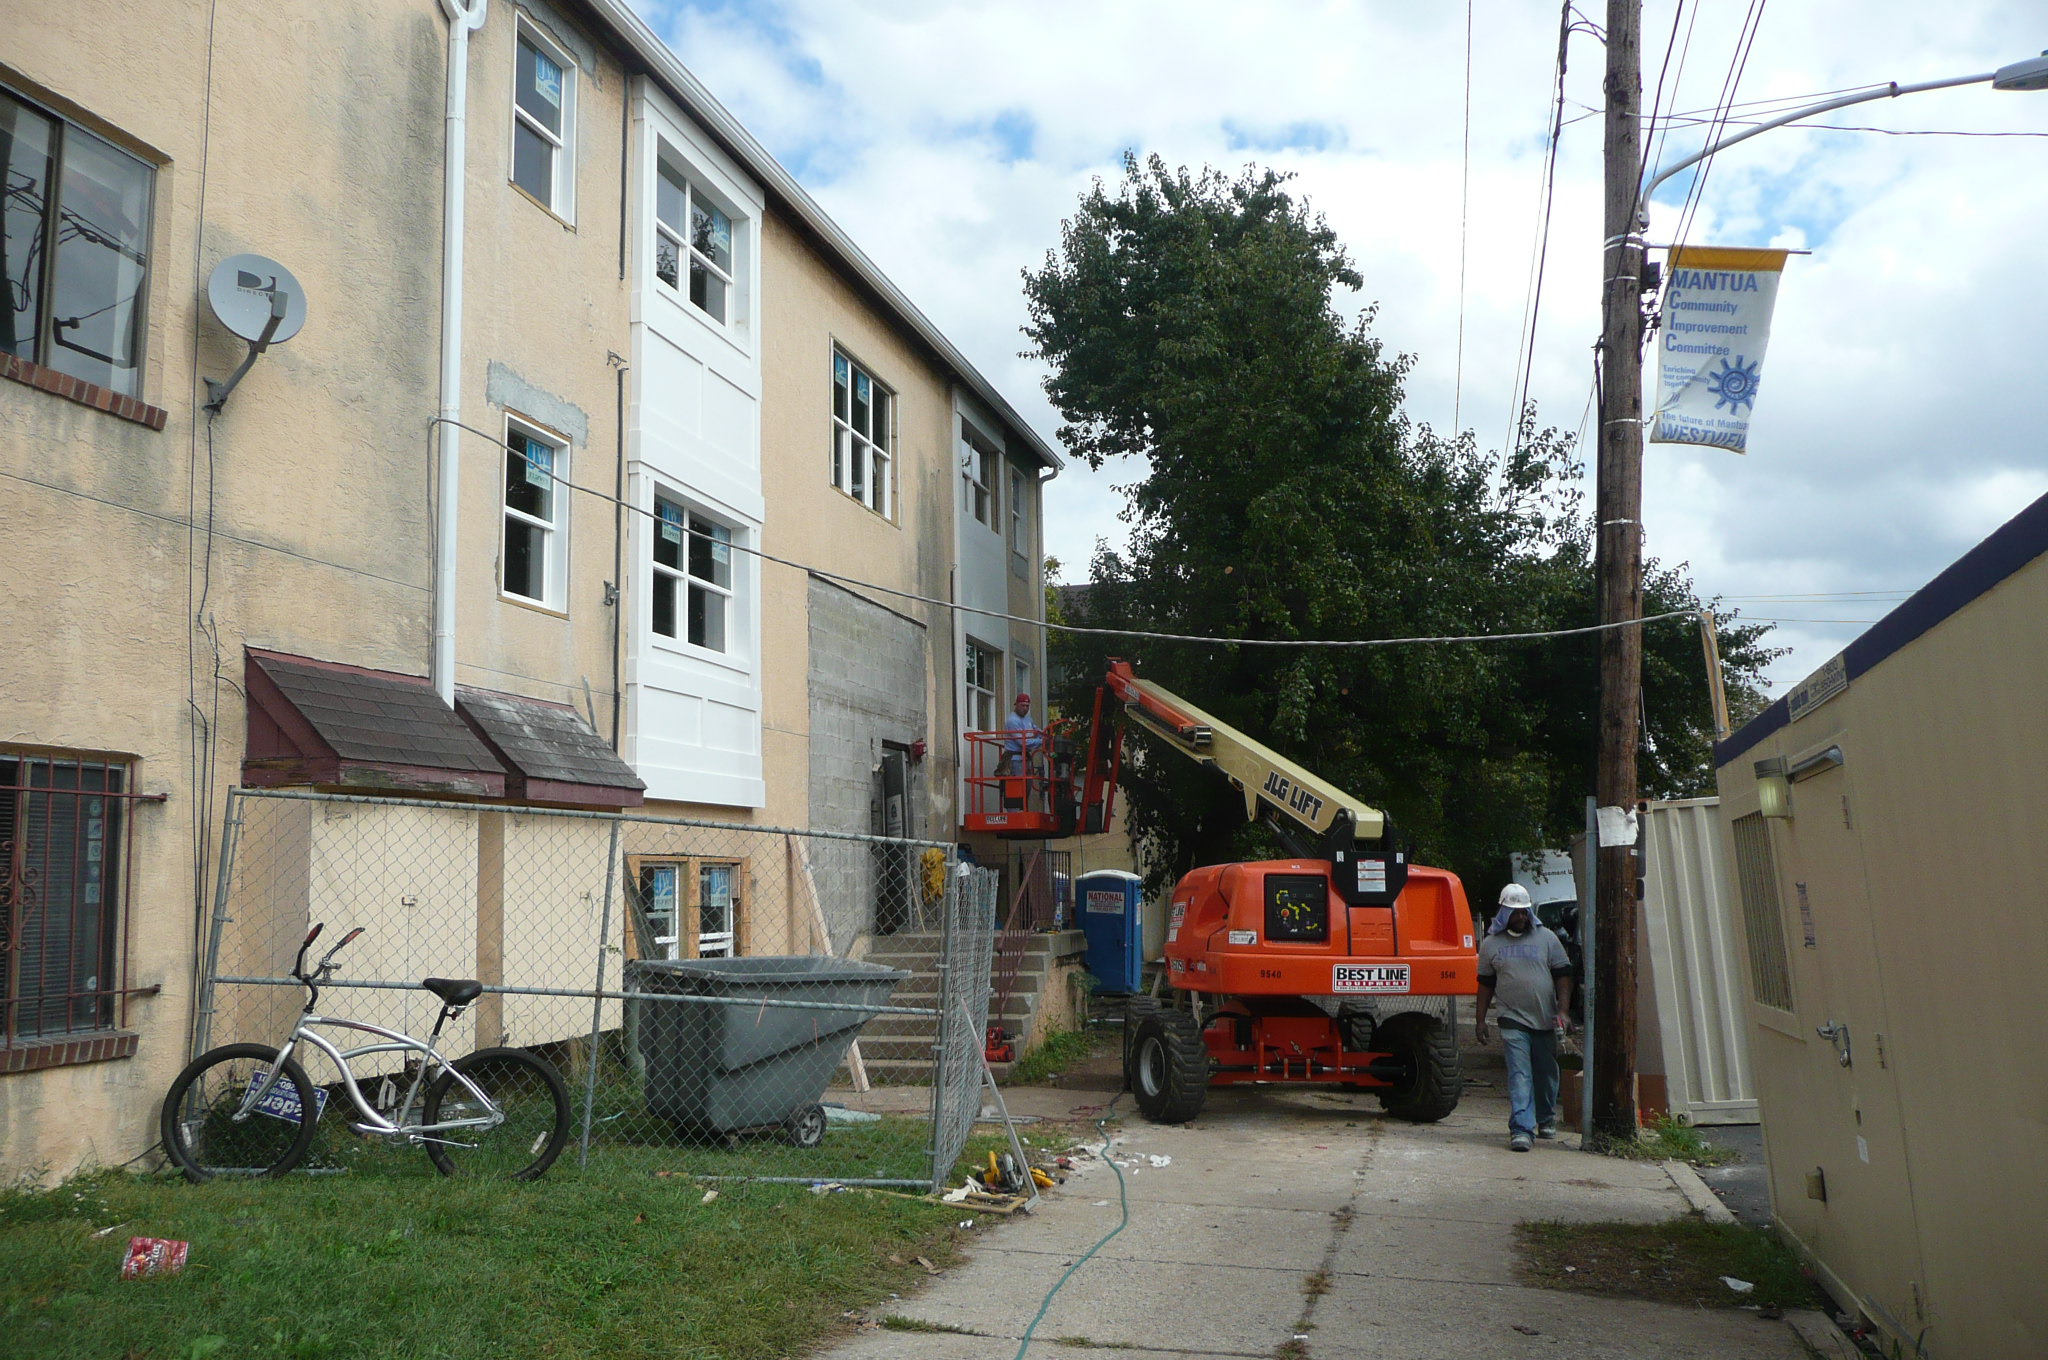 Workers began the renovation of the Mt. Vernon Manor Apartments about a month ago.